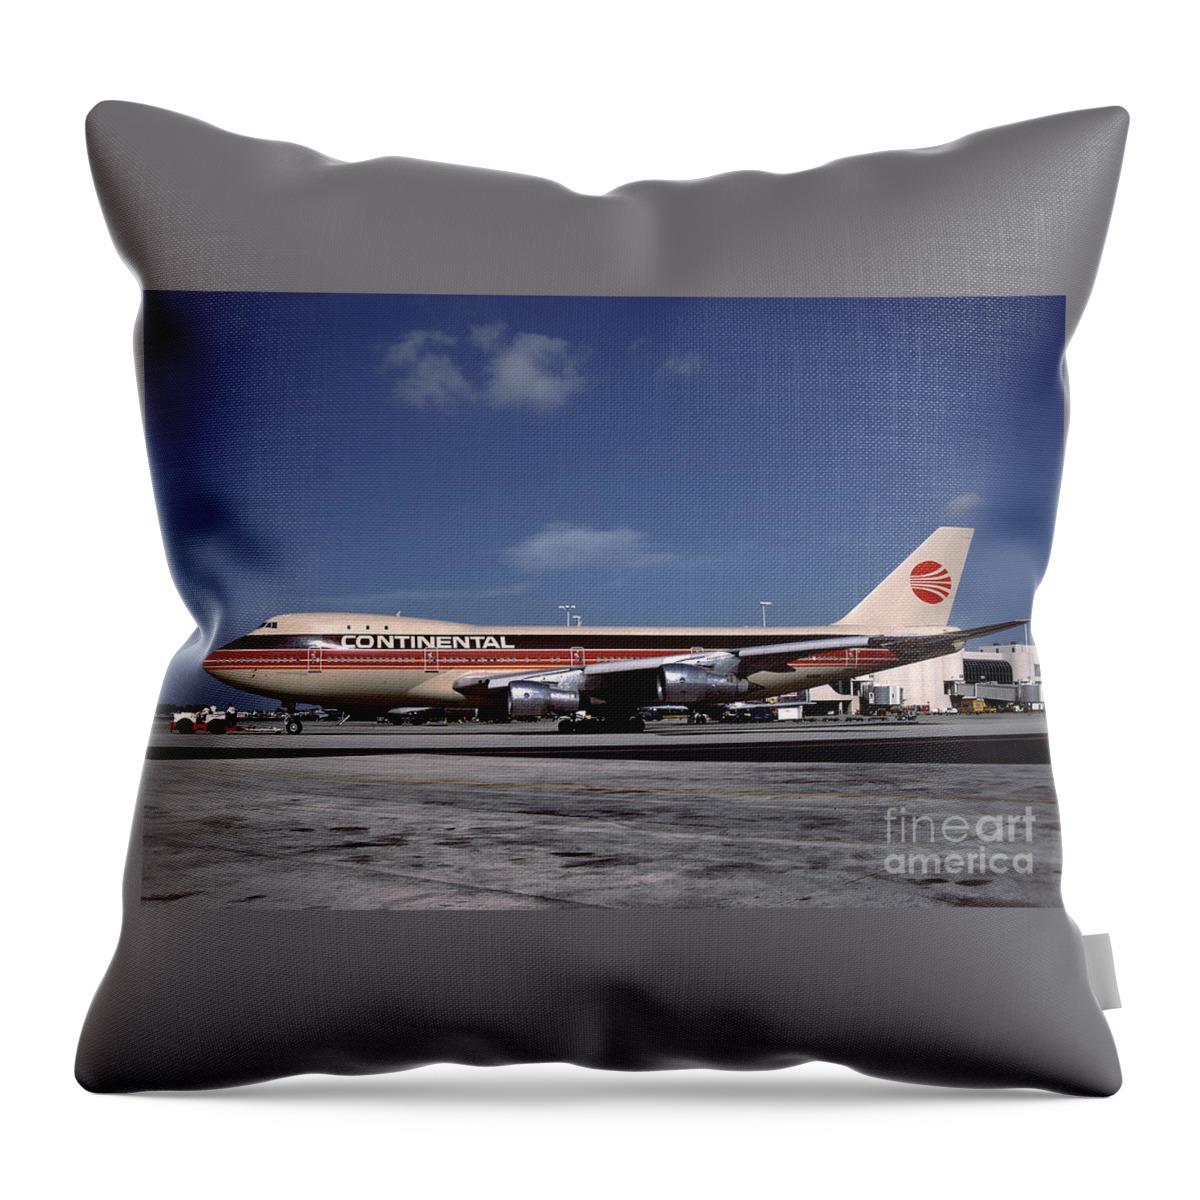 N17011 Throw Pillow featuring the photograph N17011, Continental Airlines, Boeing 747-143 by Wernher Krutein